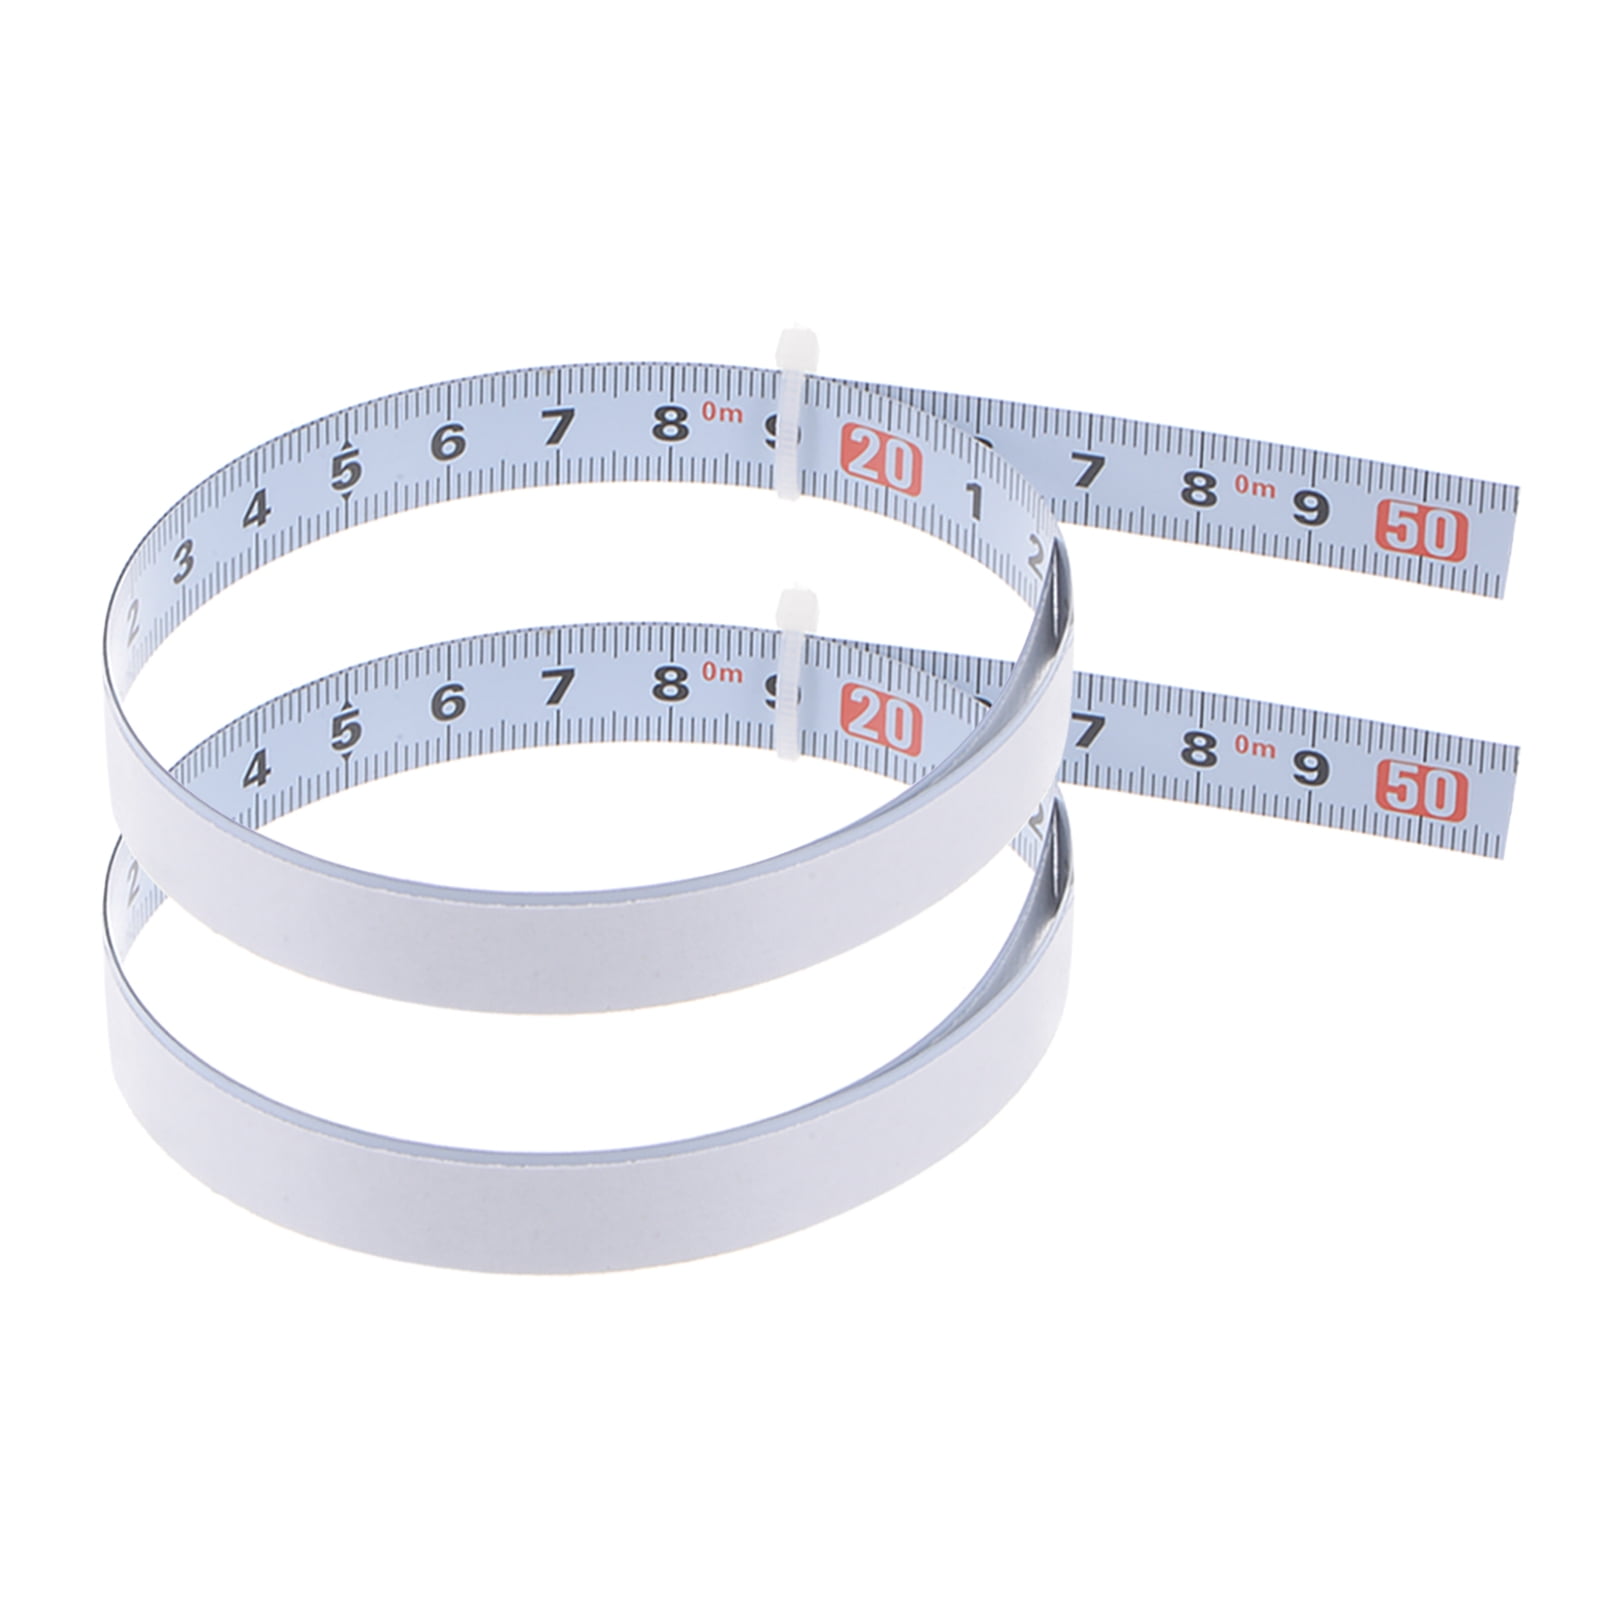 2 Pack Self Adhesive Tape Measure 50cm Metric Left to Right Reading  Measuring Tape Steel Sticky Ruler, White 